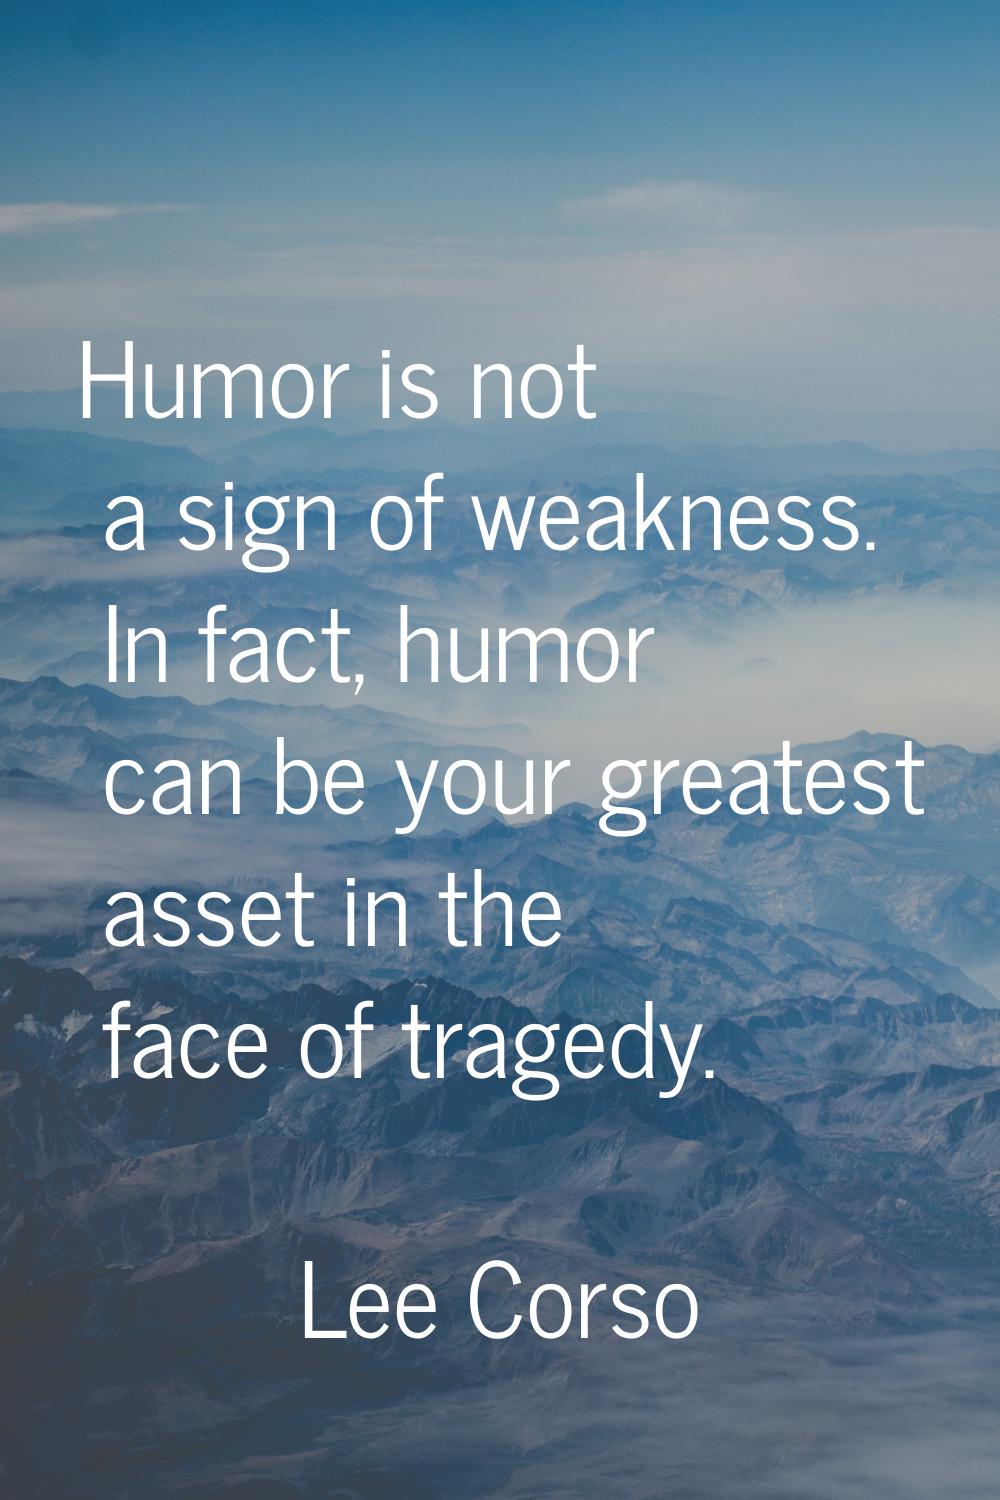 Humor is not a sign of weakness. In fact, humor can be your greatest asset in the face of tragedy.